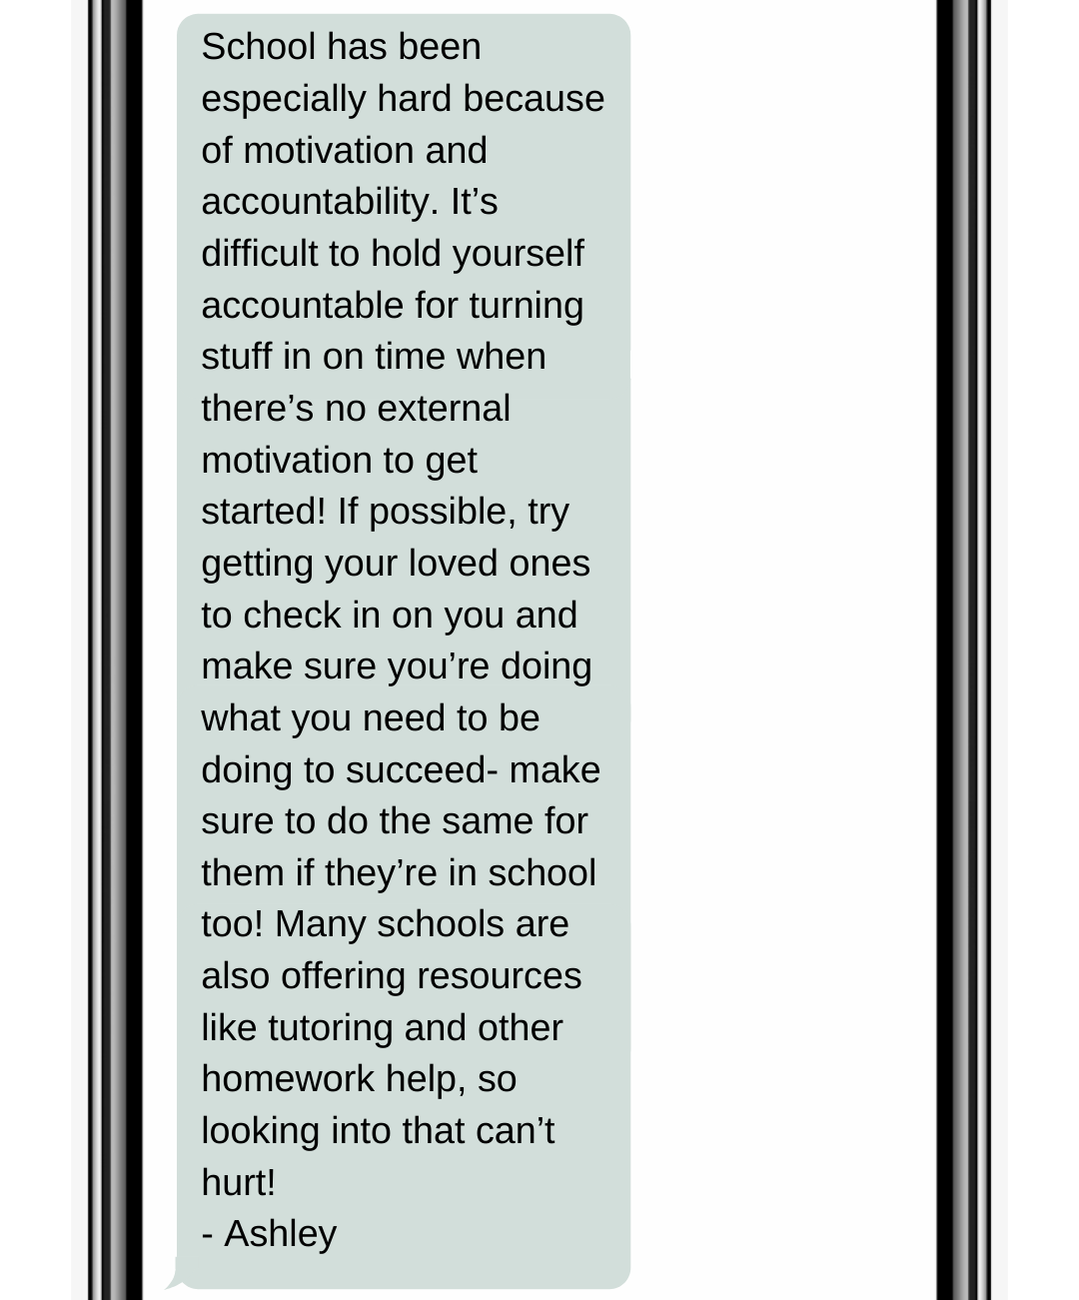 School has been especially hard because of motivation and accountability. It’s difficult to hold yourself accountable for turning stuff in on time when there’s no external motivation to get started! If possible, try getting your loved ones to check in on you and make sure you’re doing what you need to be doing to succeed- make sure to do the same for them if they’re in school too! Many schools are also offering resources like tutoring and other homework help, so looking into that can’t hurt! - Ashley